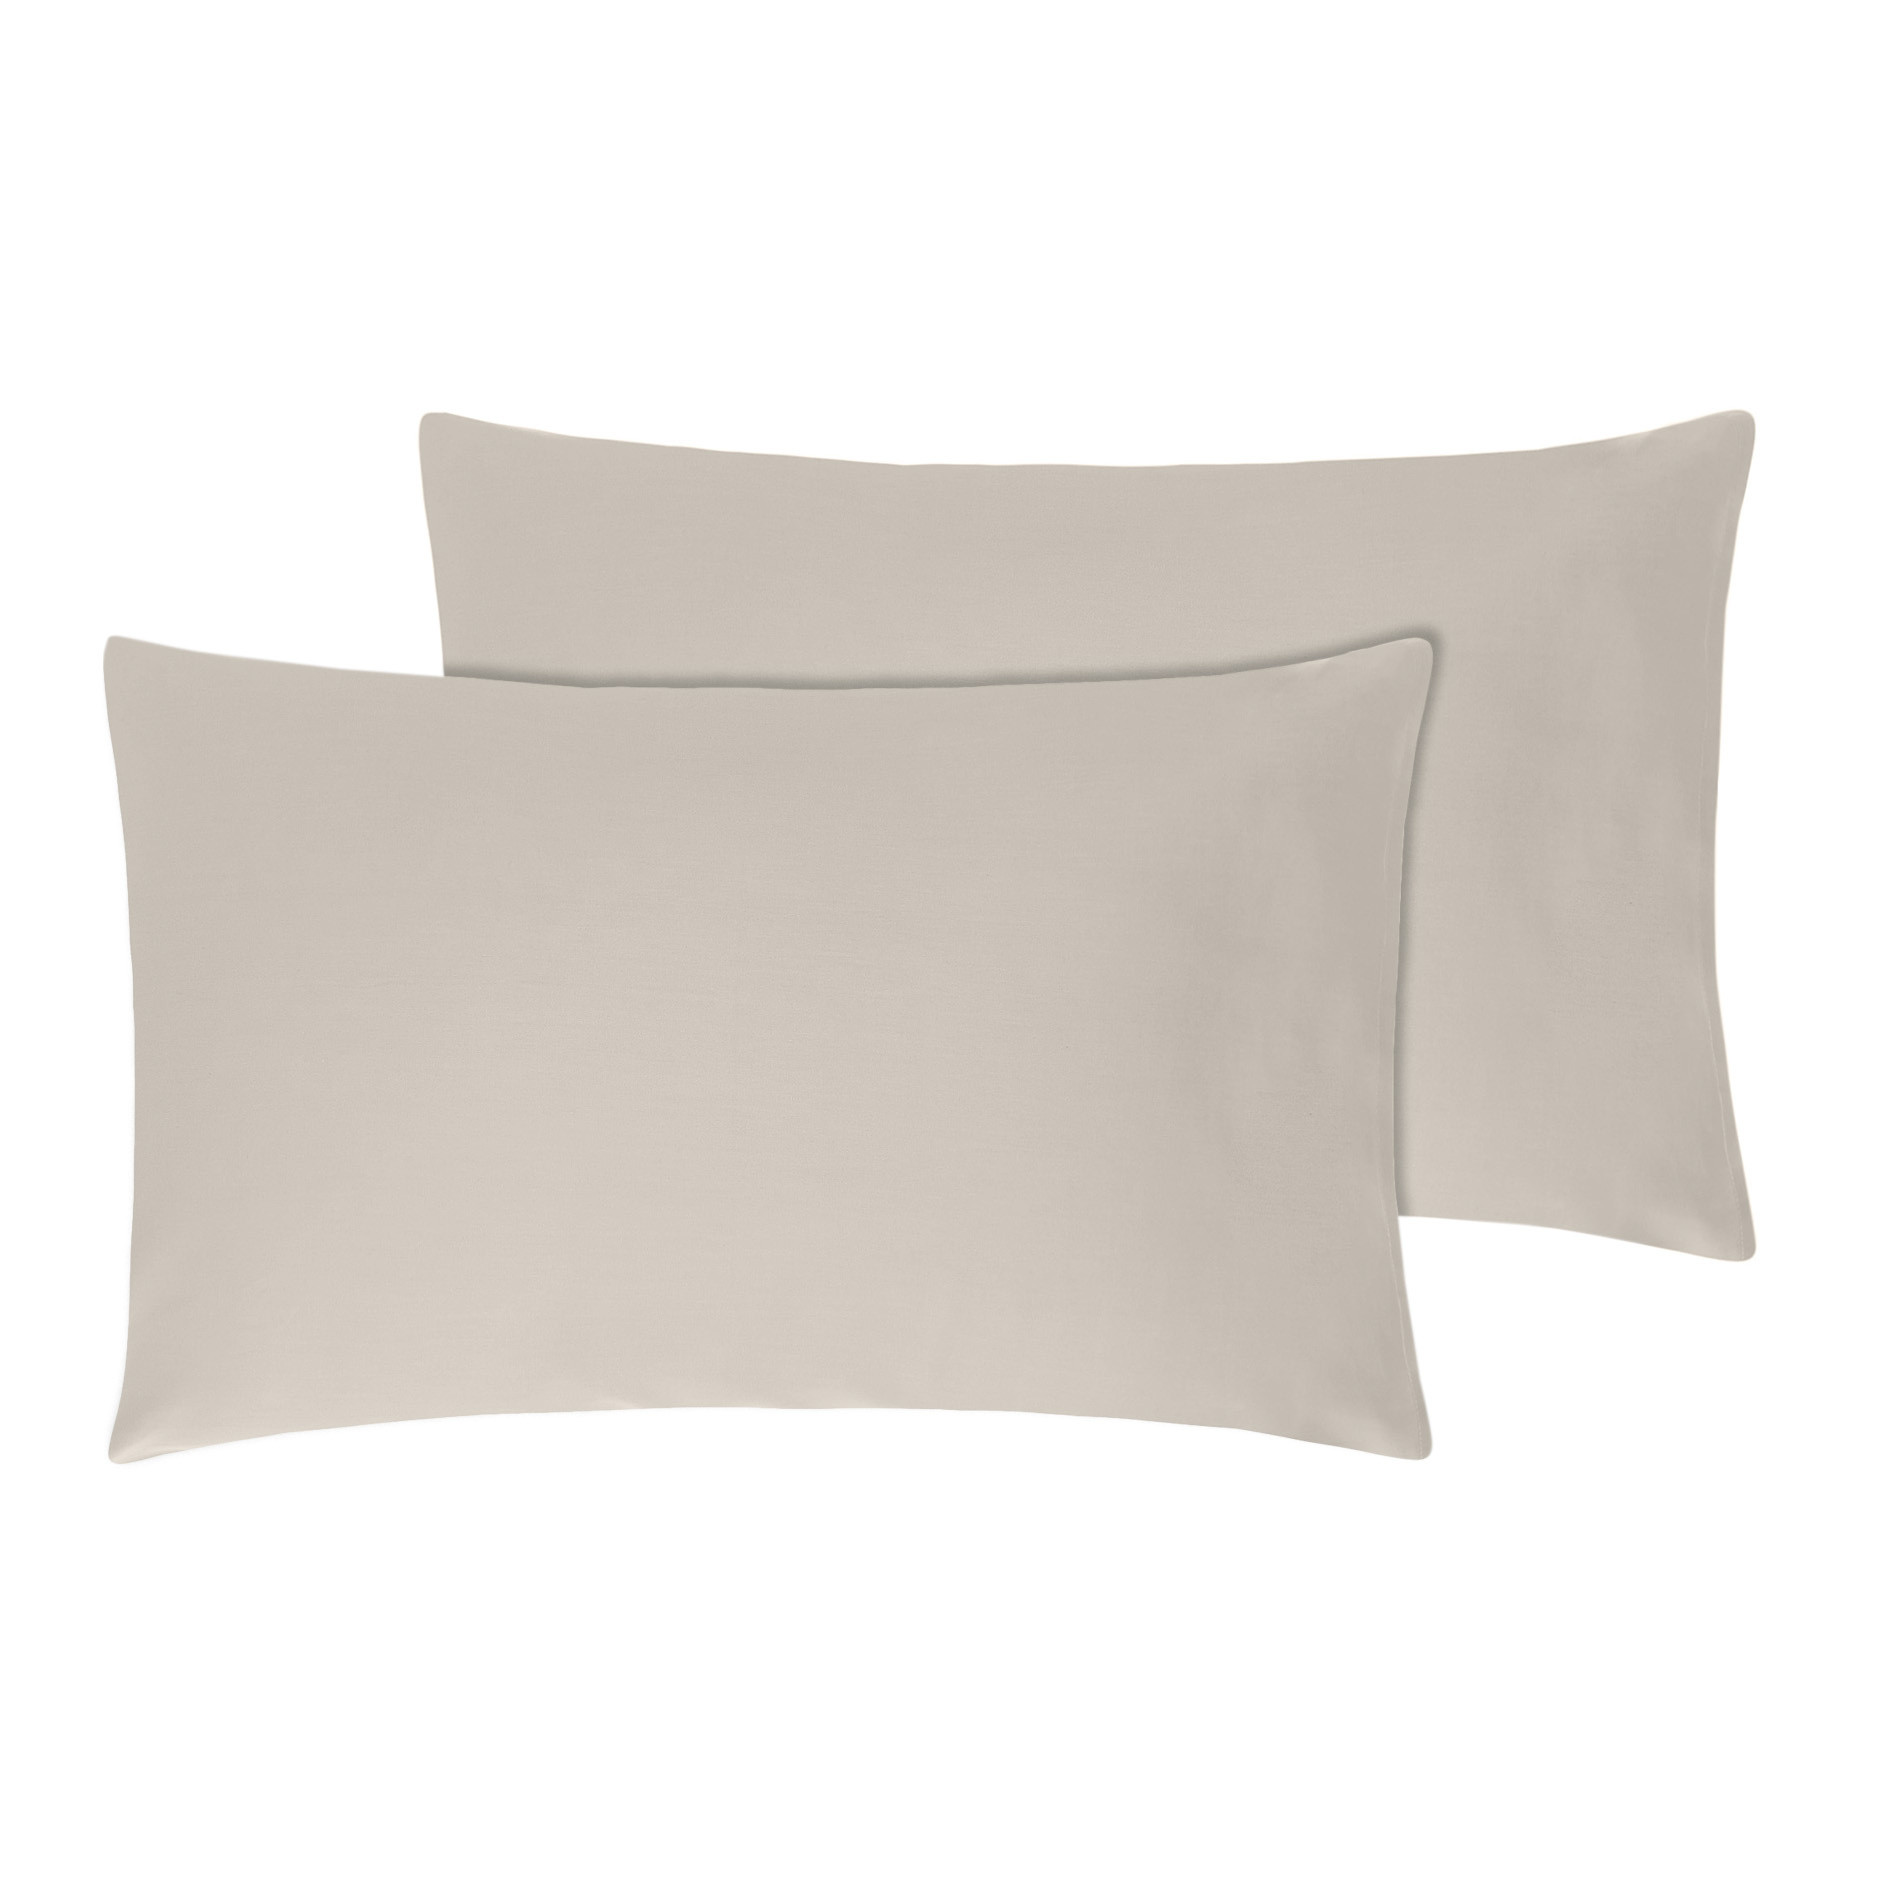 Zefiro 2-pack pillowcases in 100% cotton satin, Dark Beige, large image number 0